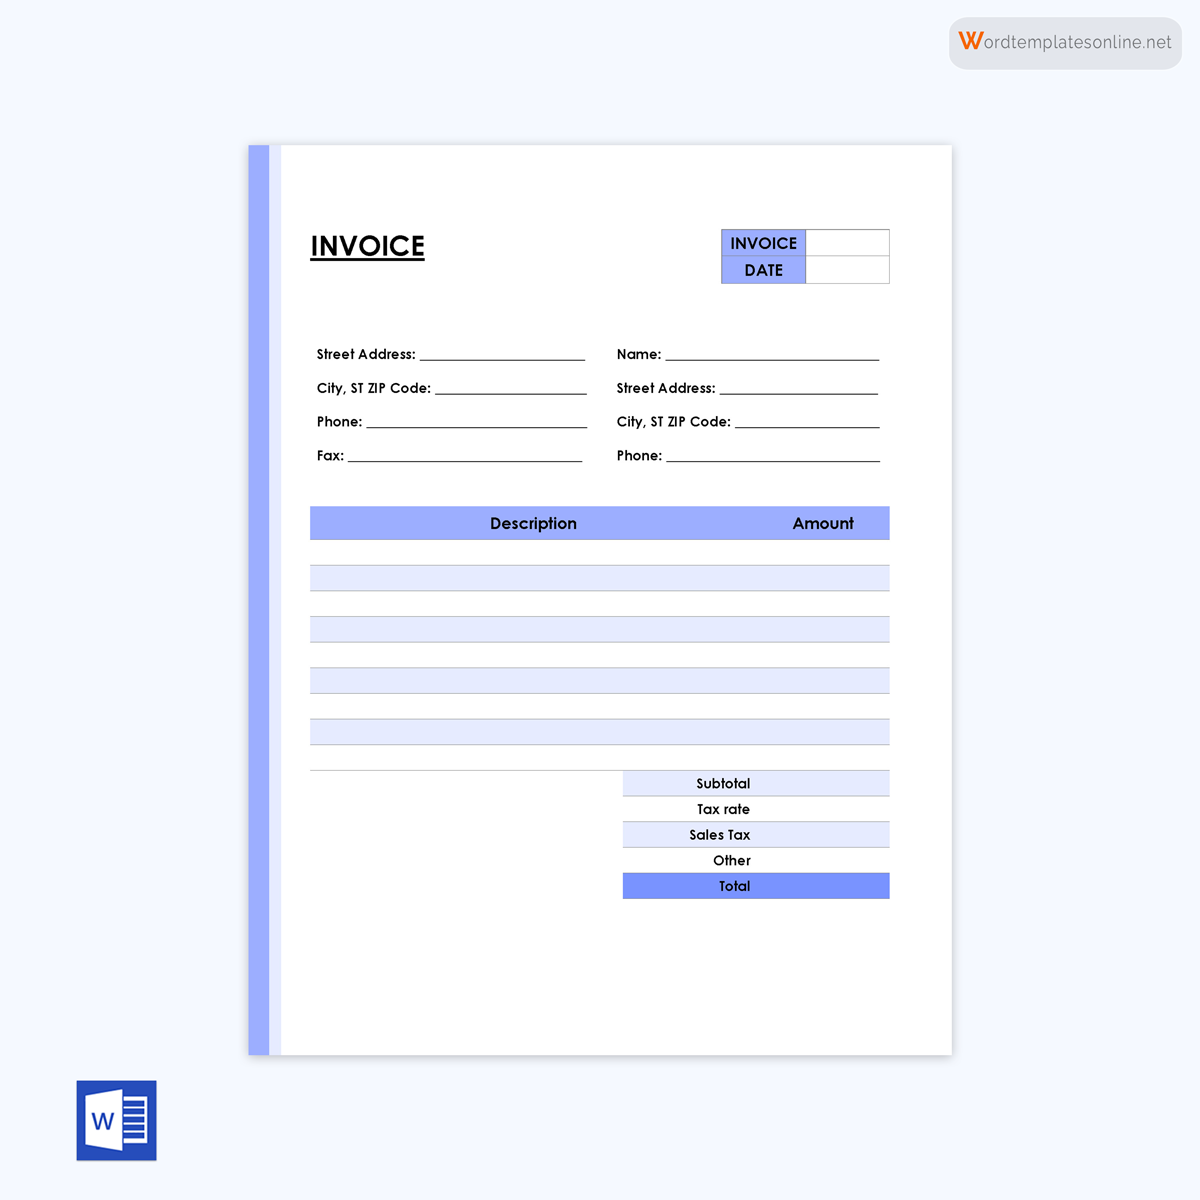 Free blank invoice template - Word format